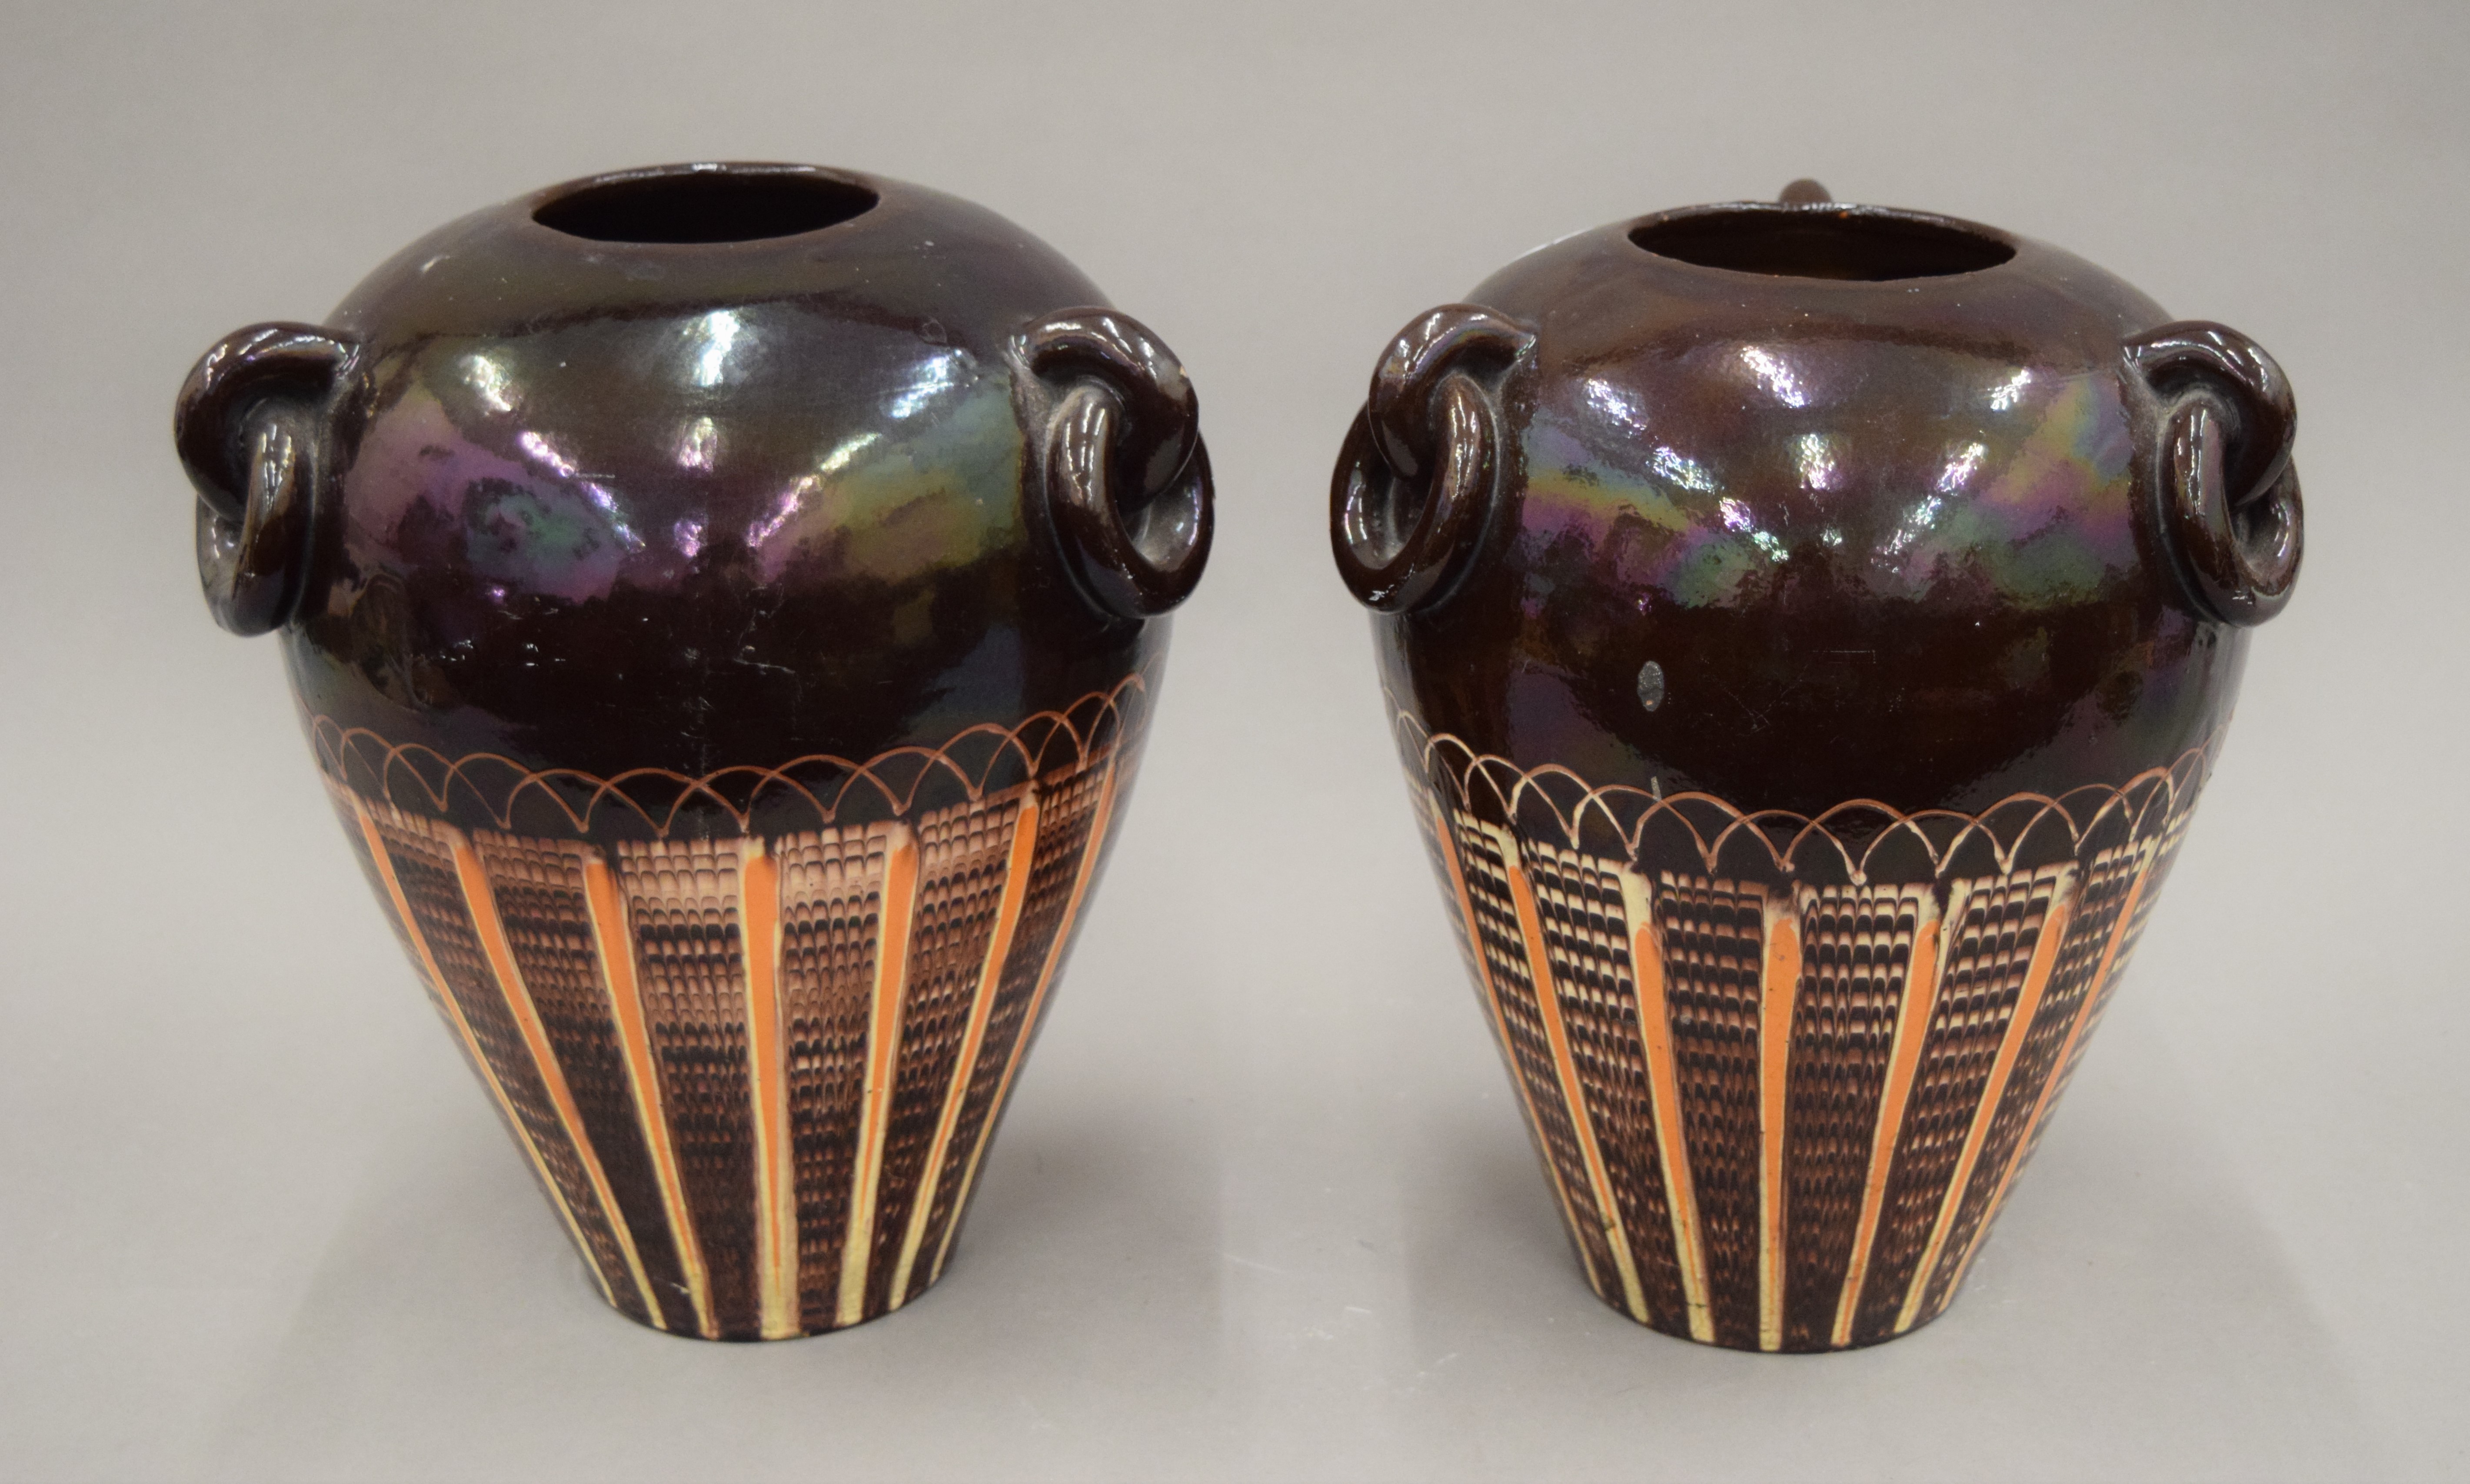 A pair of brown, cream and orange glazed vases, one with underside initialled with T.B. 26 cm high.